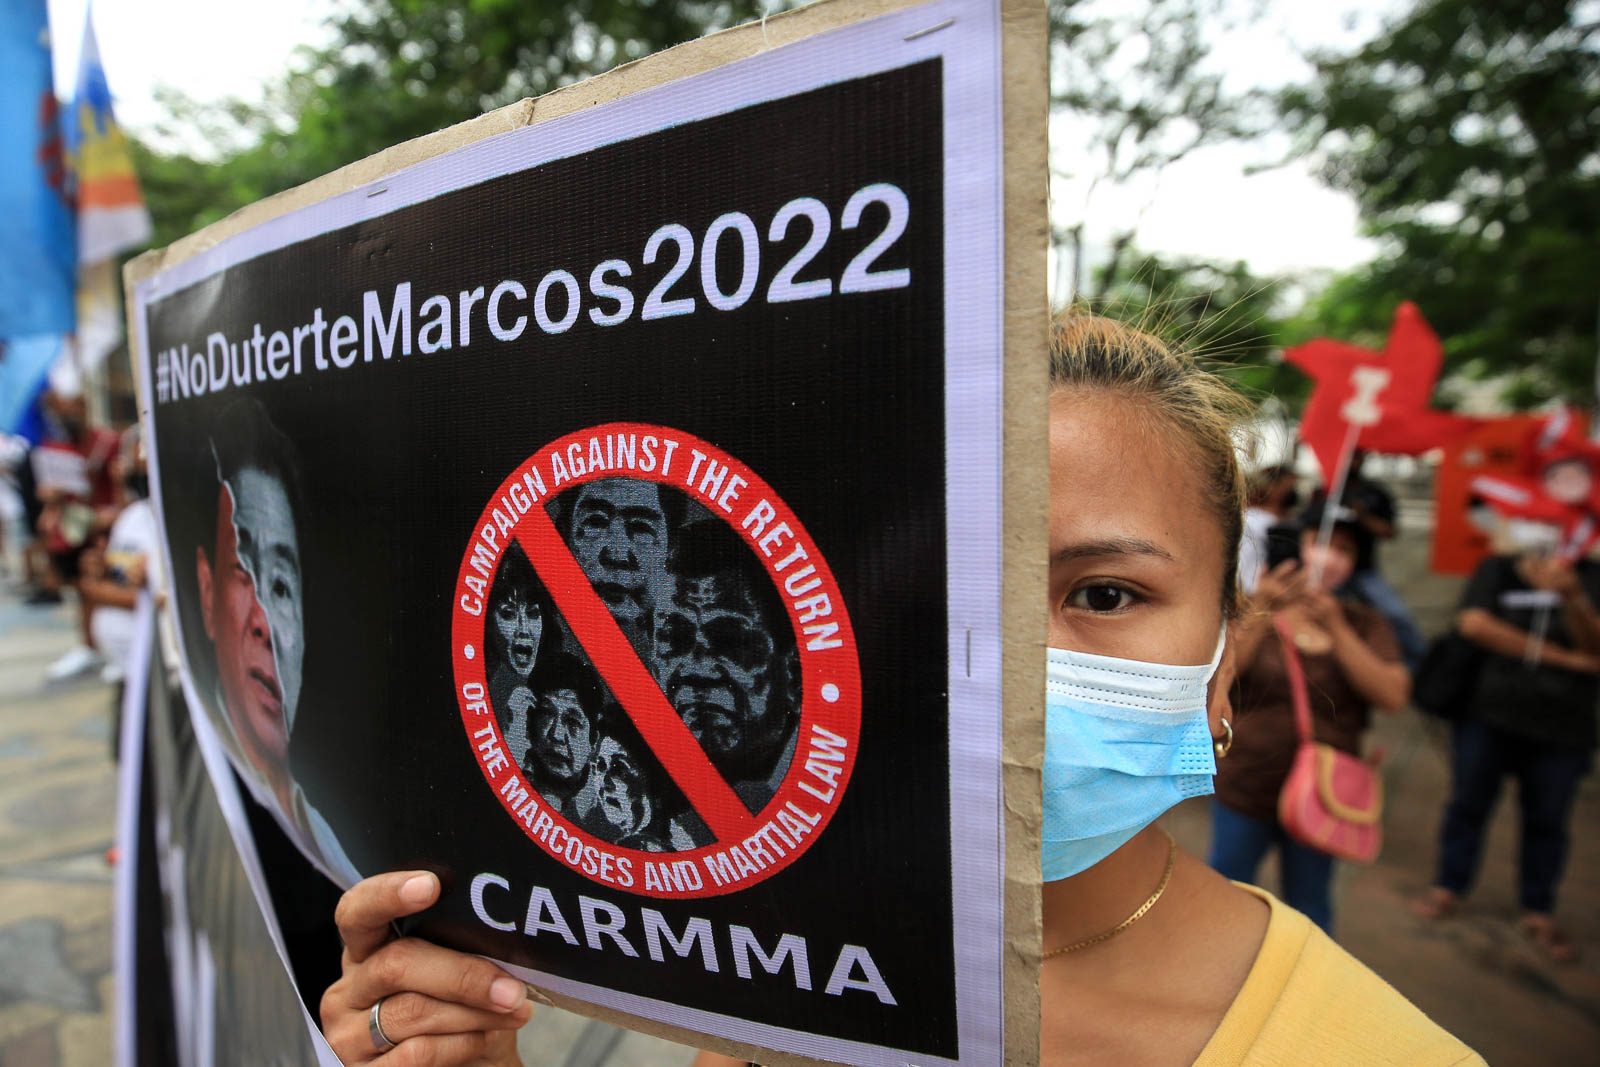 Martial law victims mobilize to counter lies about Marcos dictatorship in Davao region